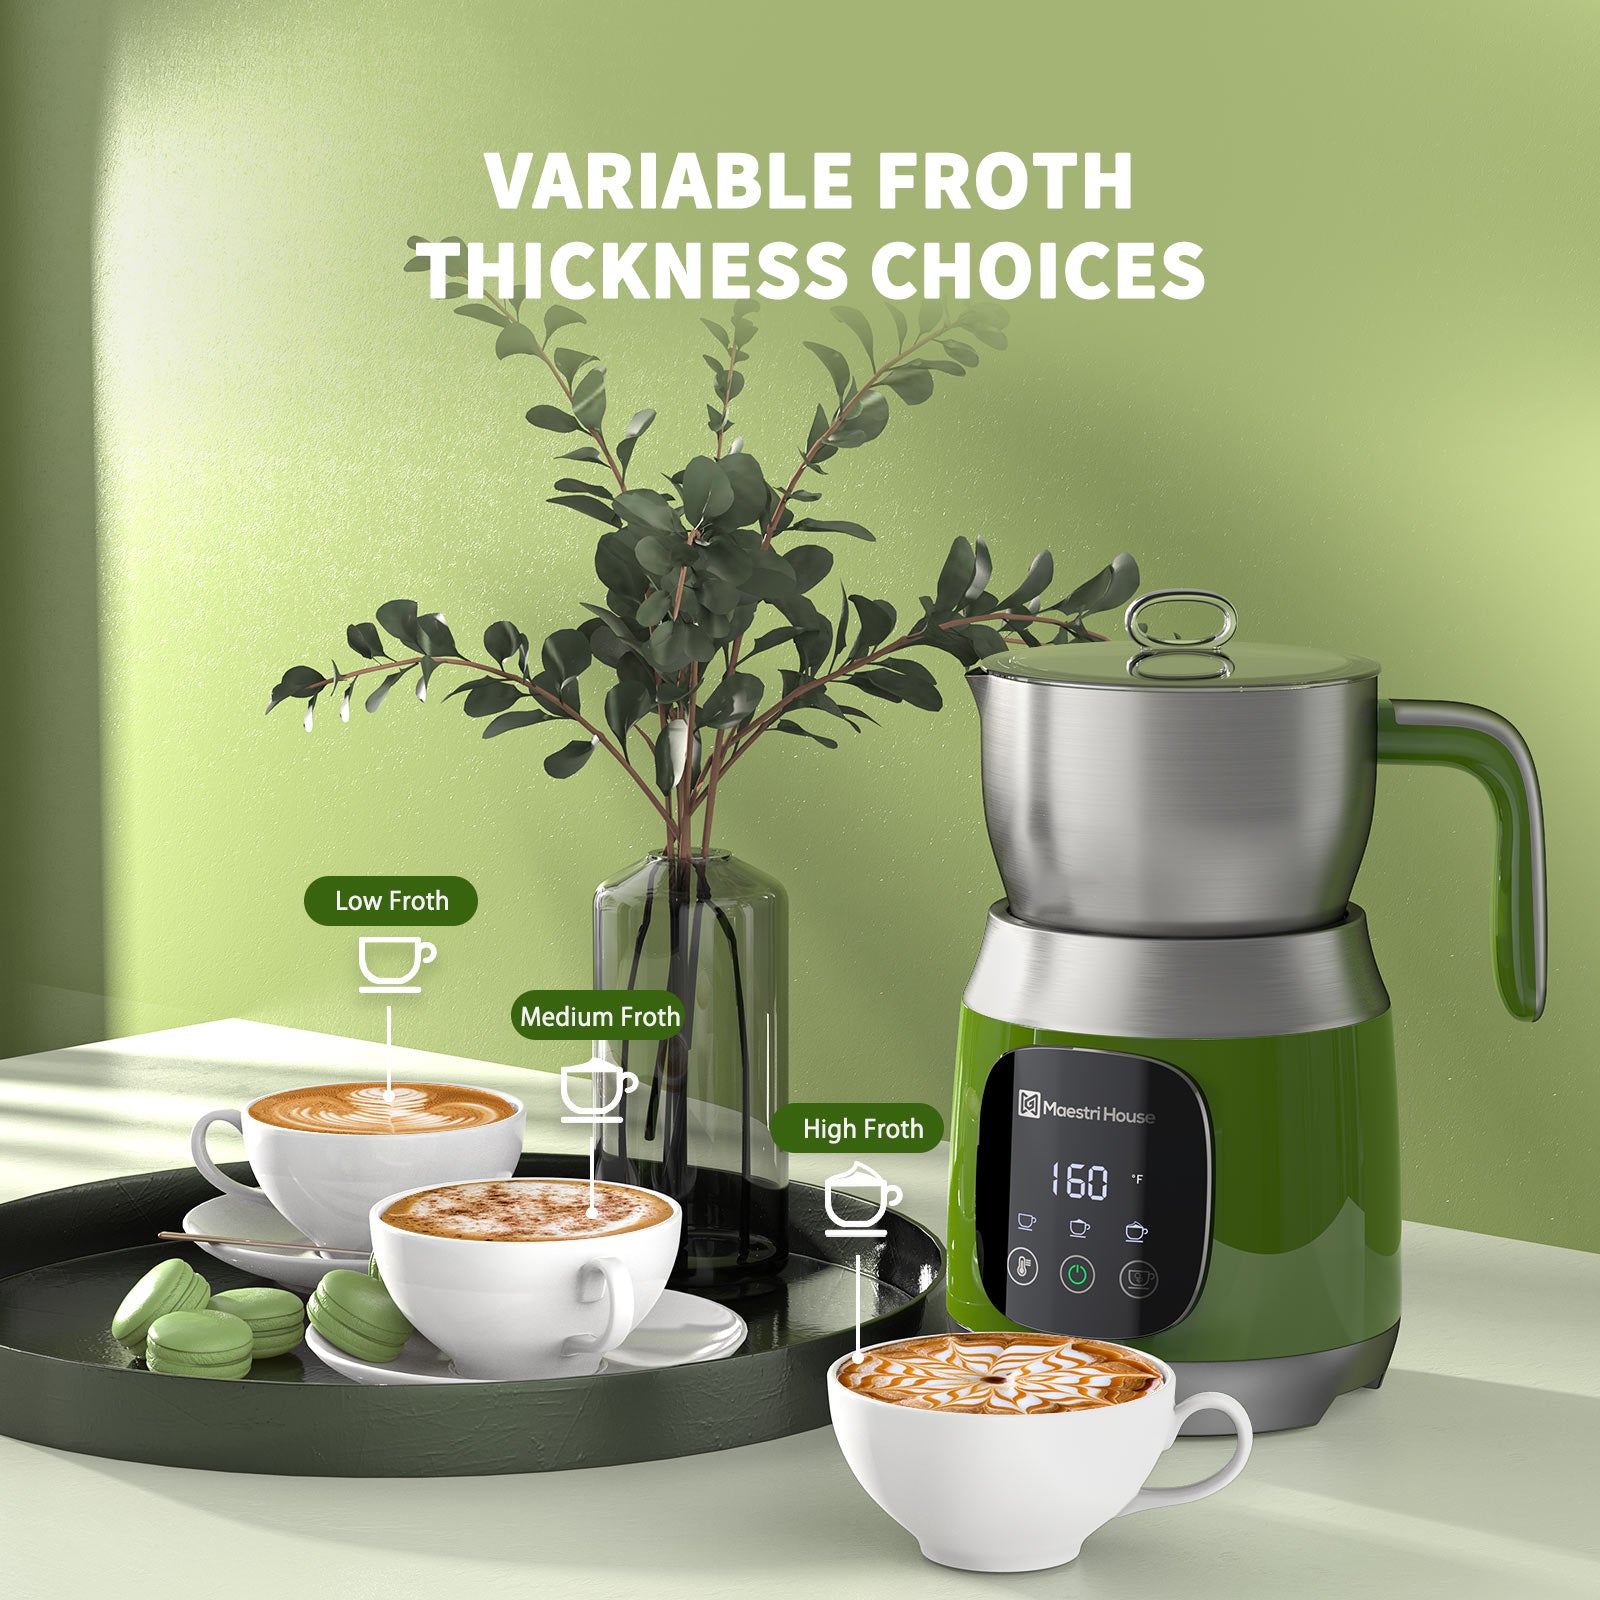 How To Use your Maestri House Detachable Milk Frother MMF9304